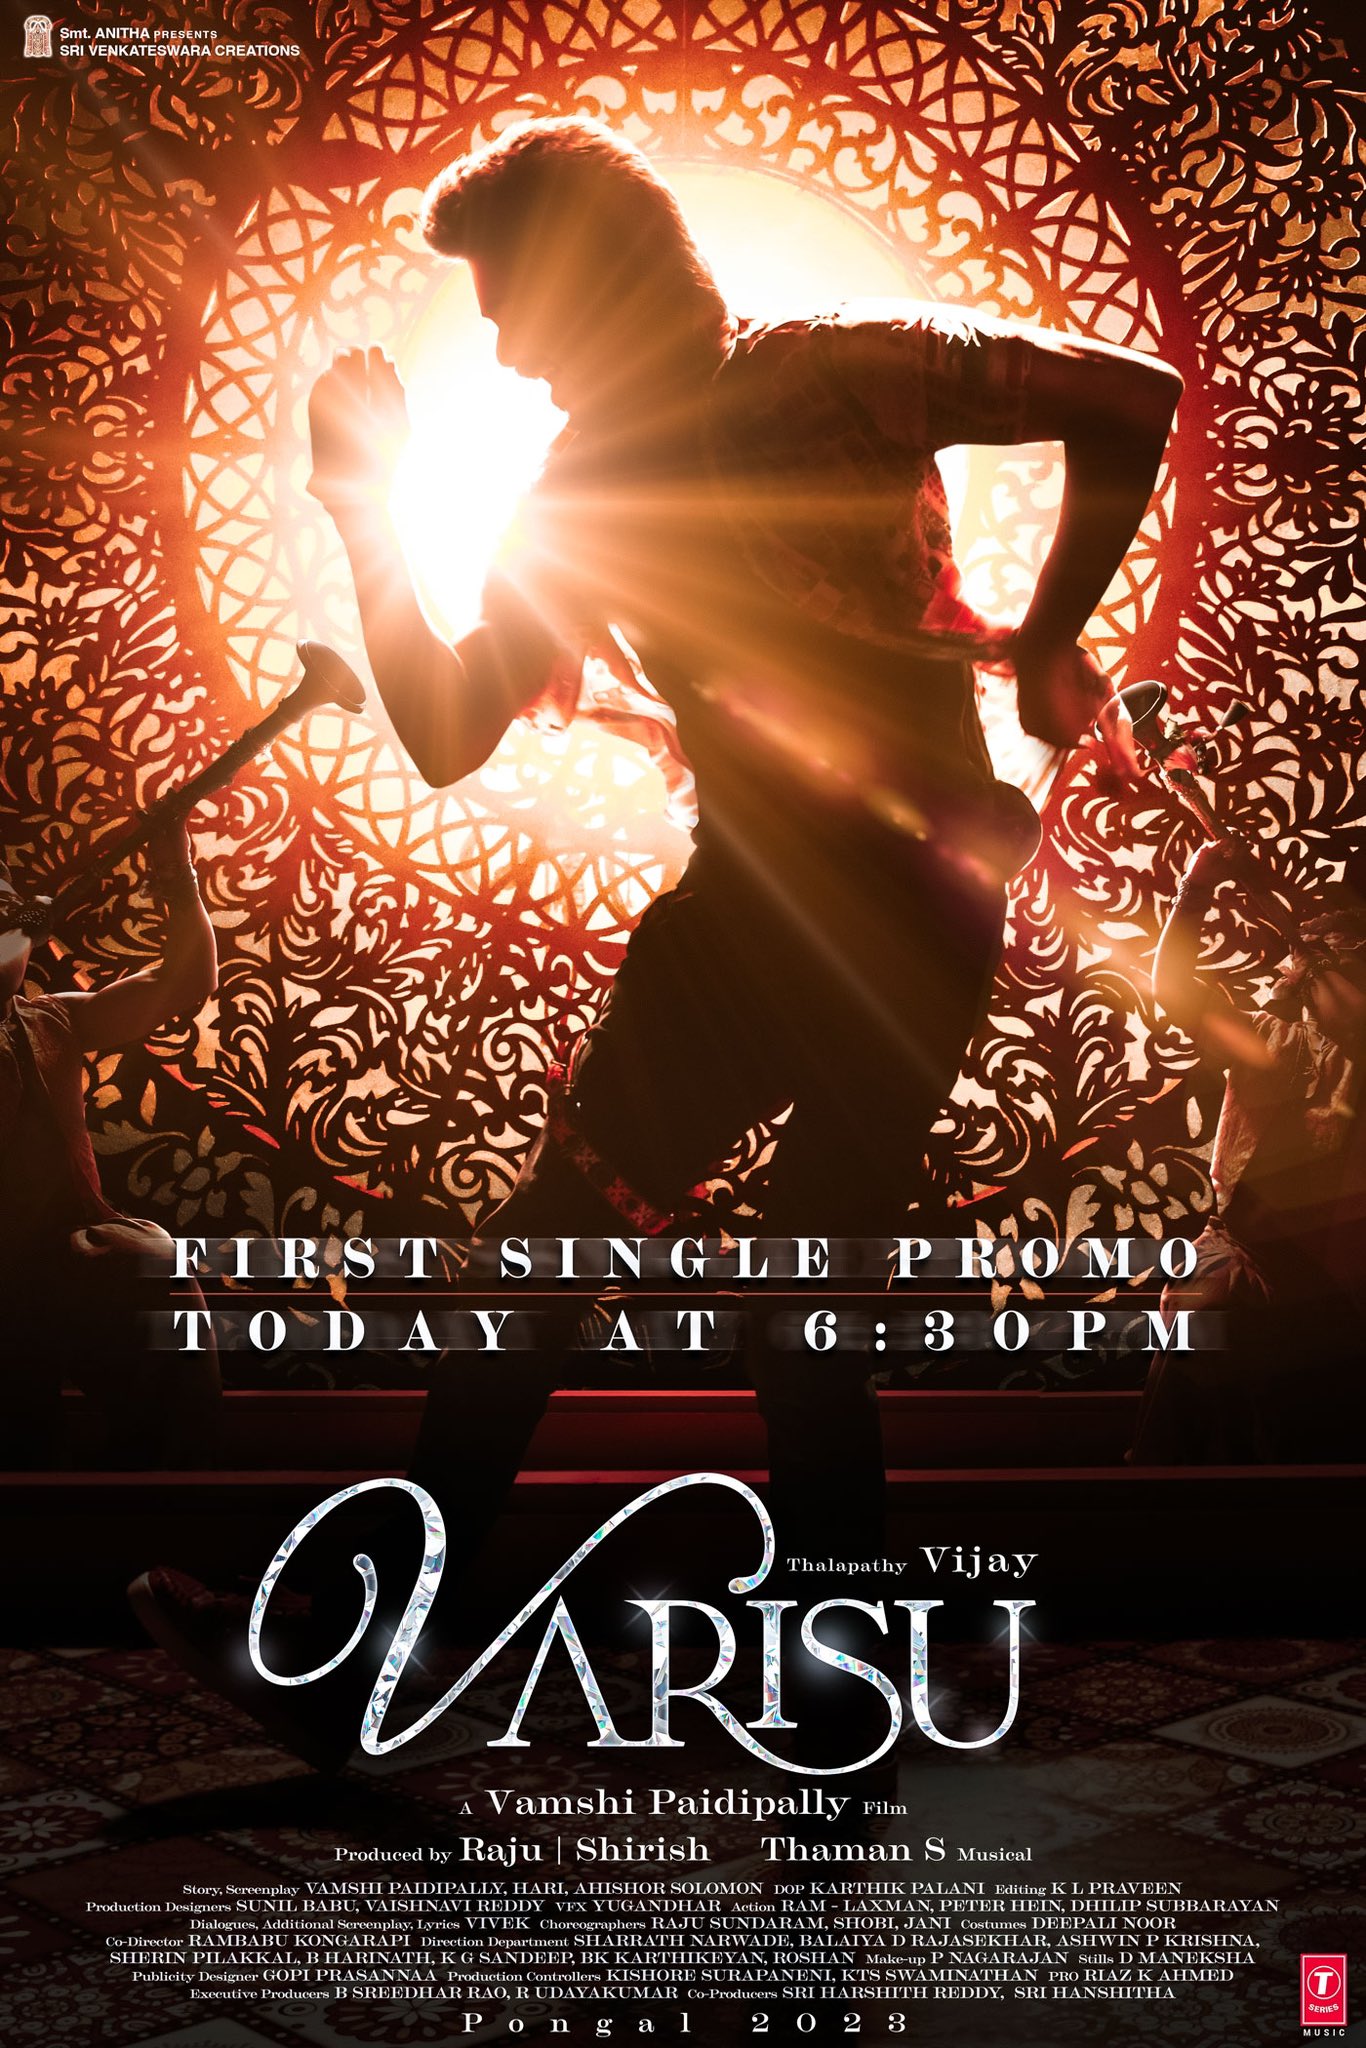 varisu movie first single promo to be released today evening announced by film crew